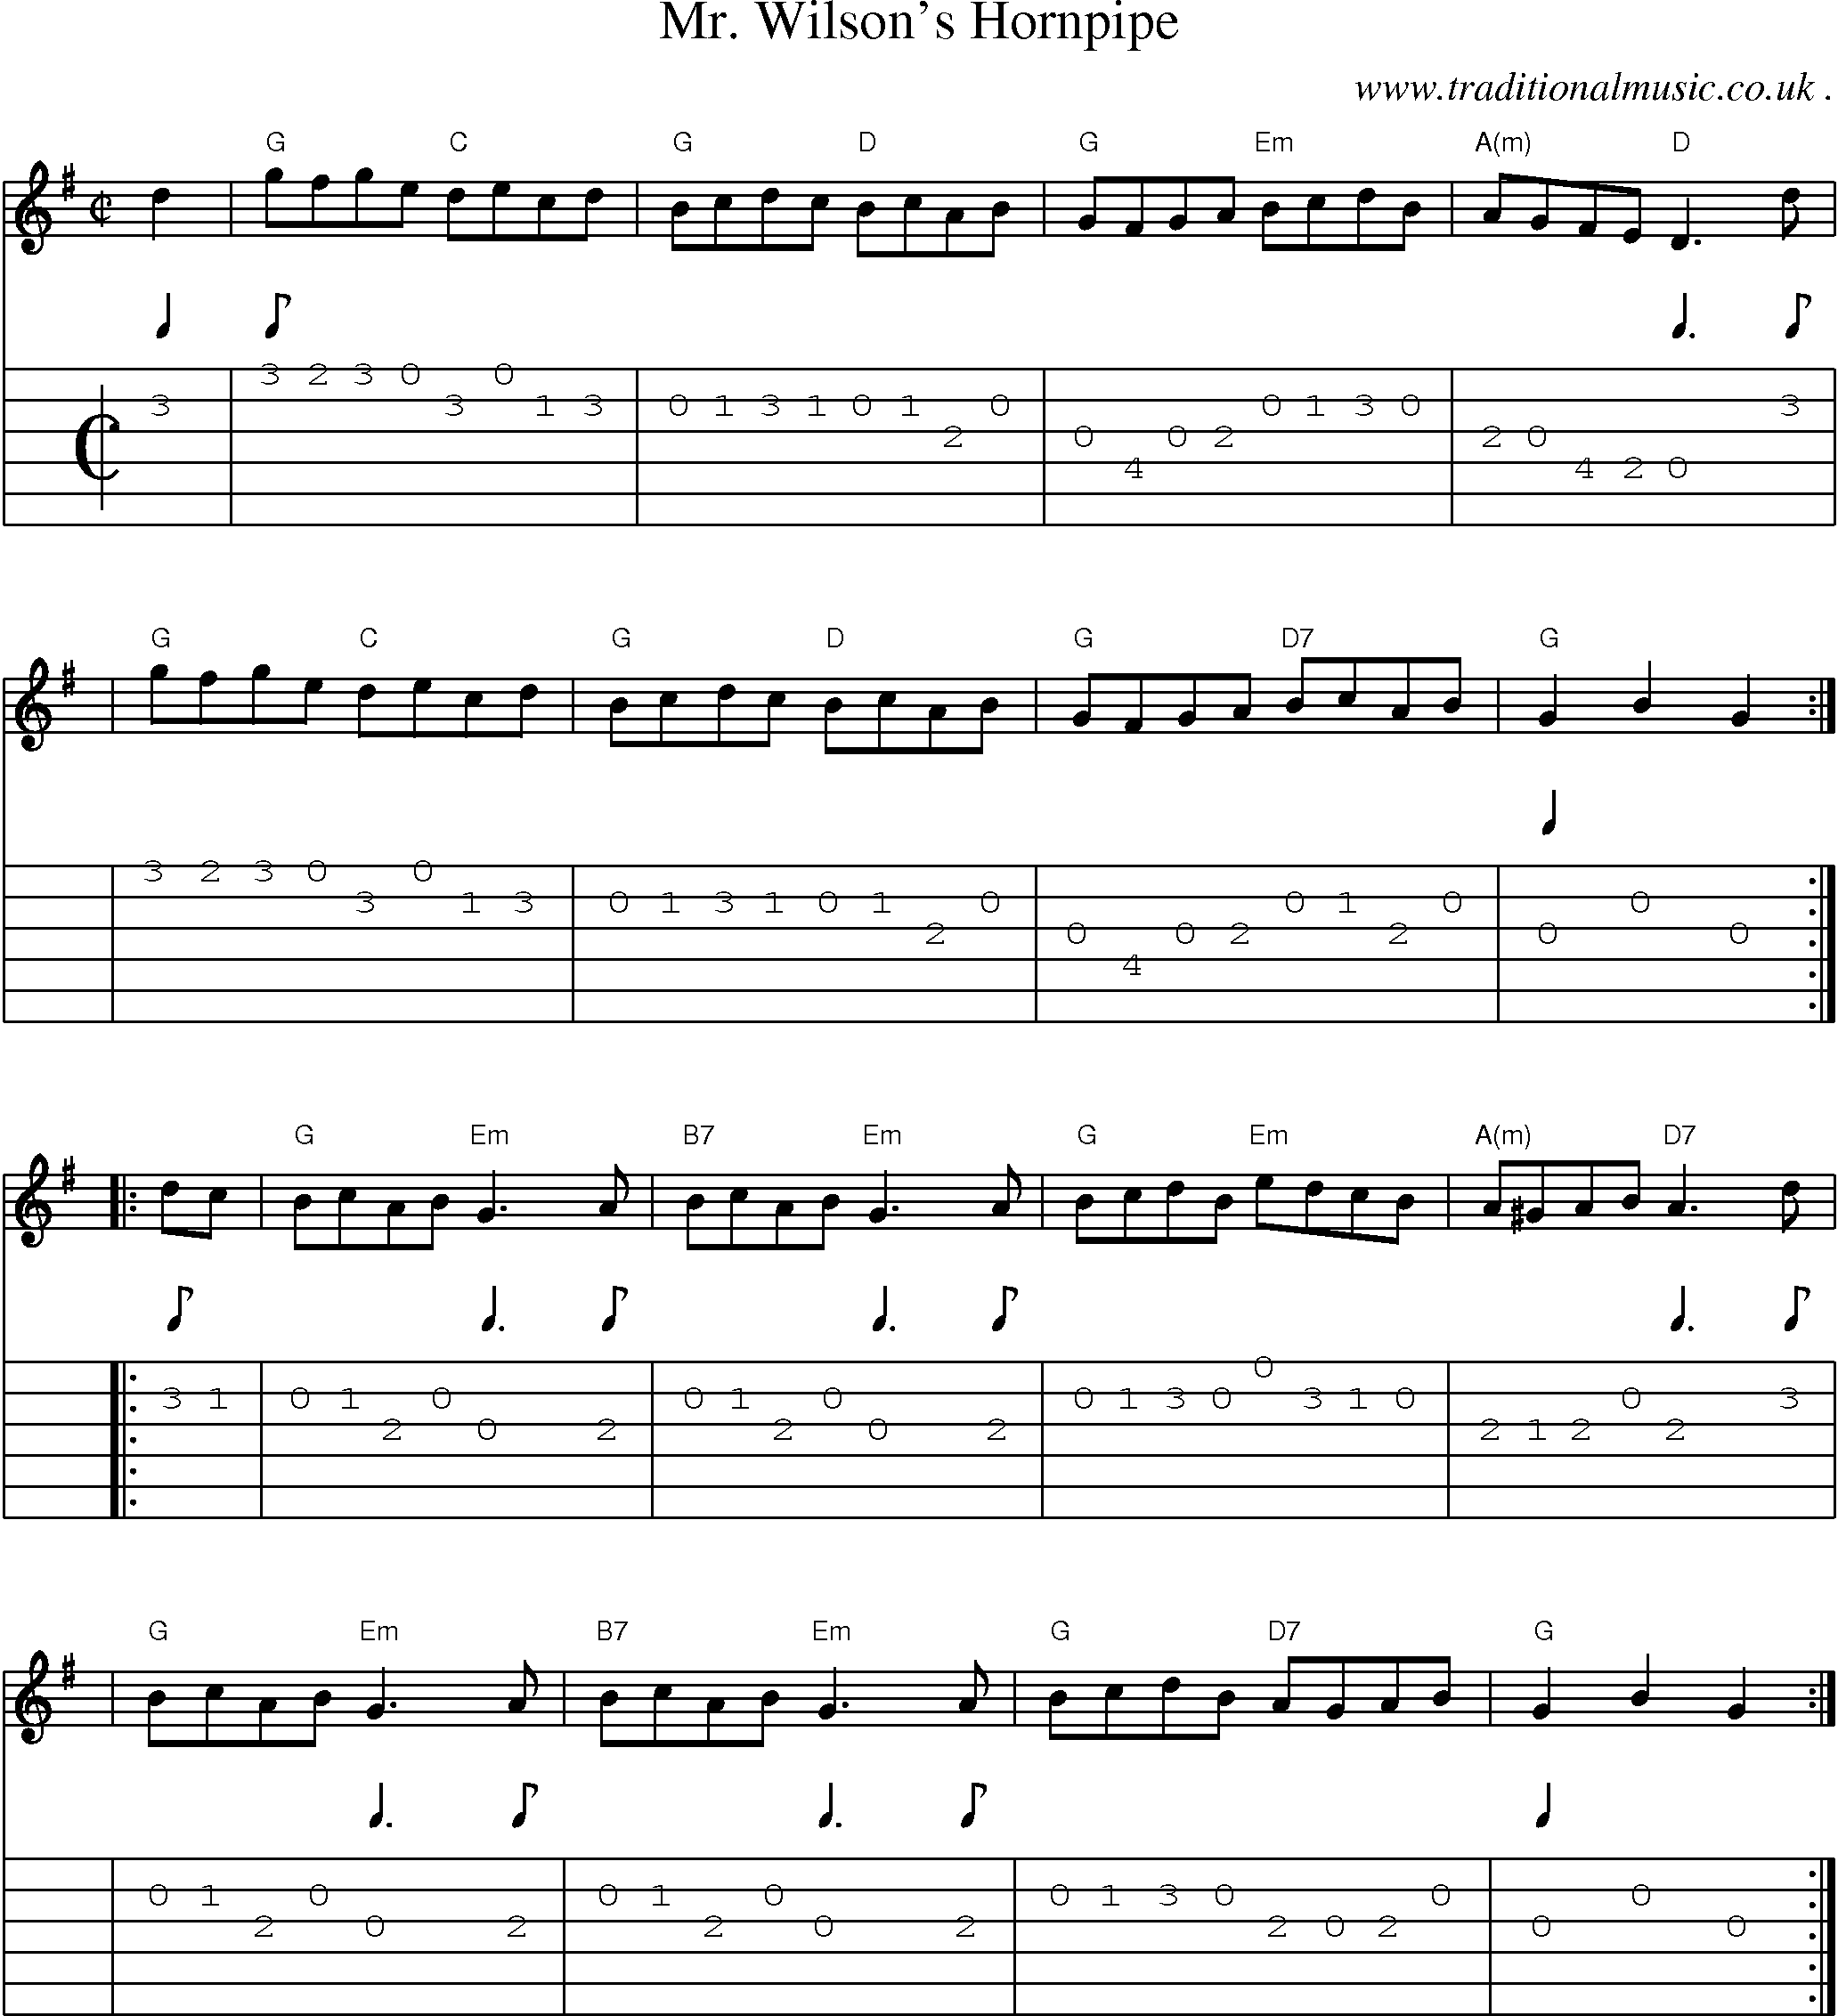 Sheet-music  score, Chords and Guitar Tabs for Mr Wilsons Hornpipe